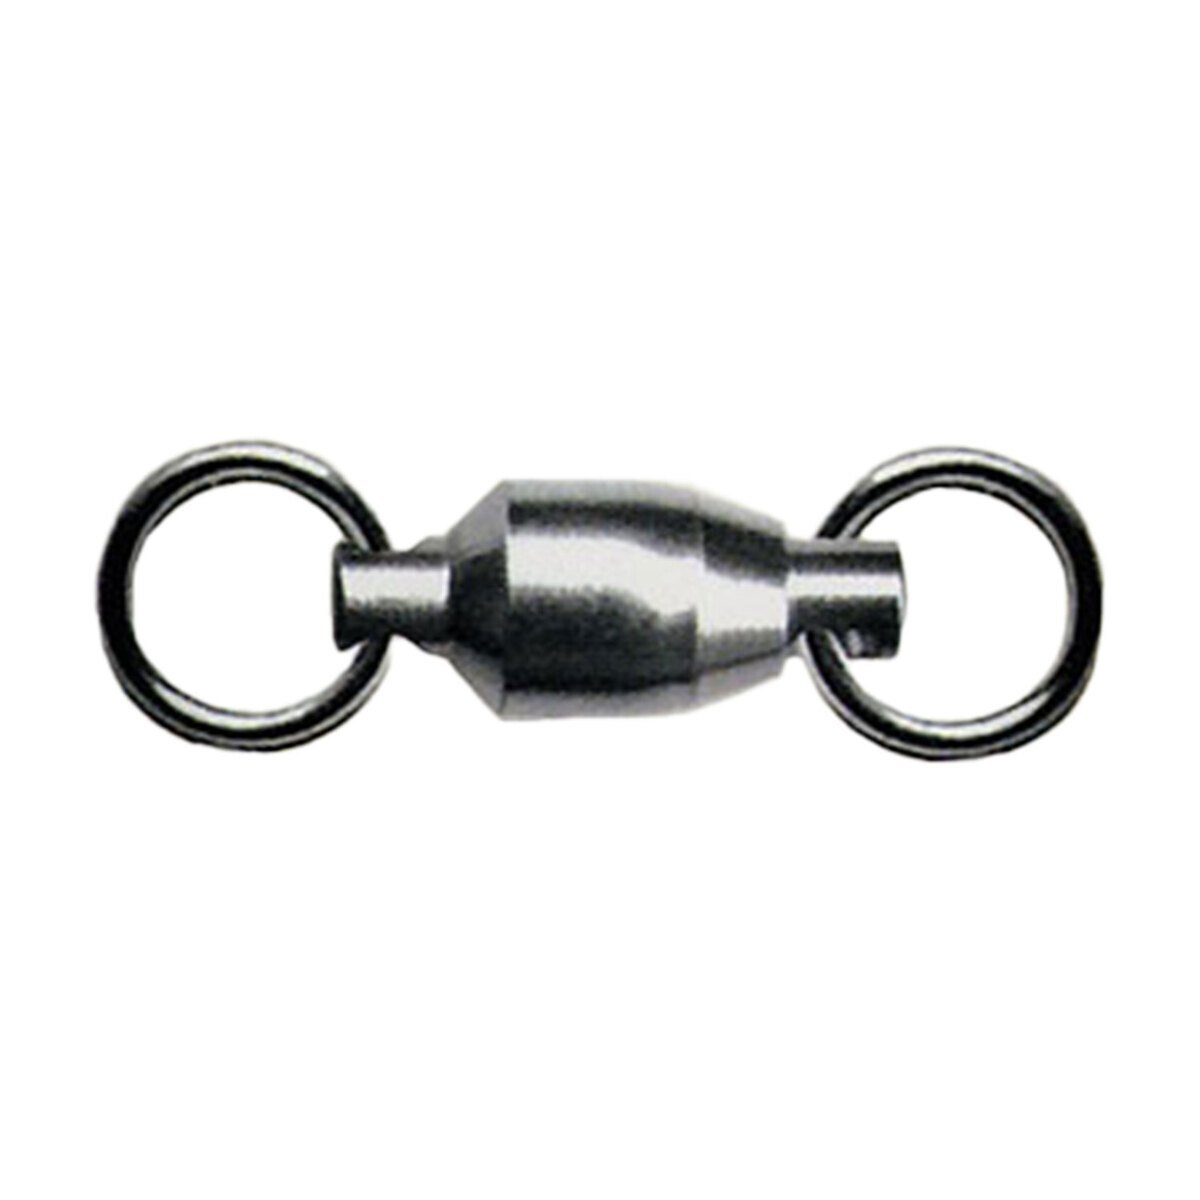 Eagle Claw Ball Bearing Swivels for sale